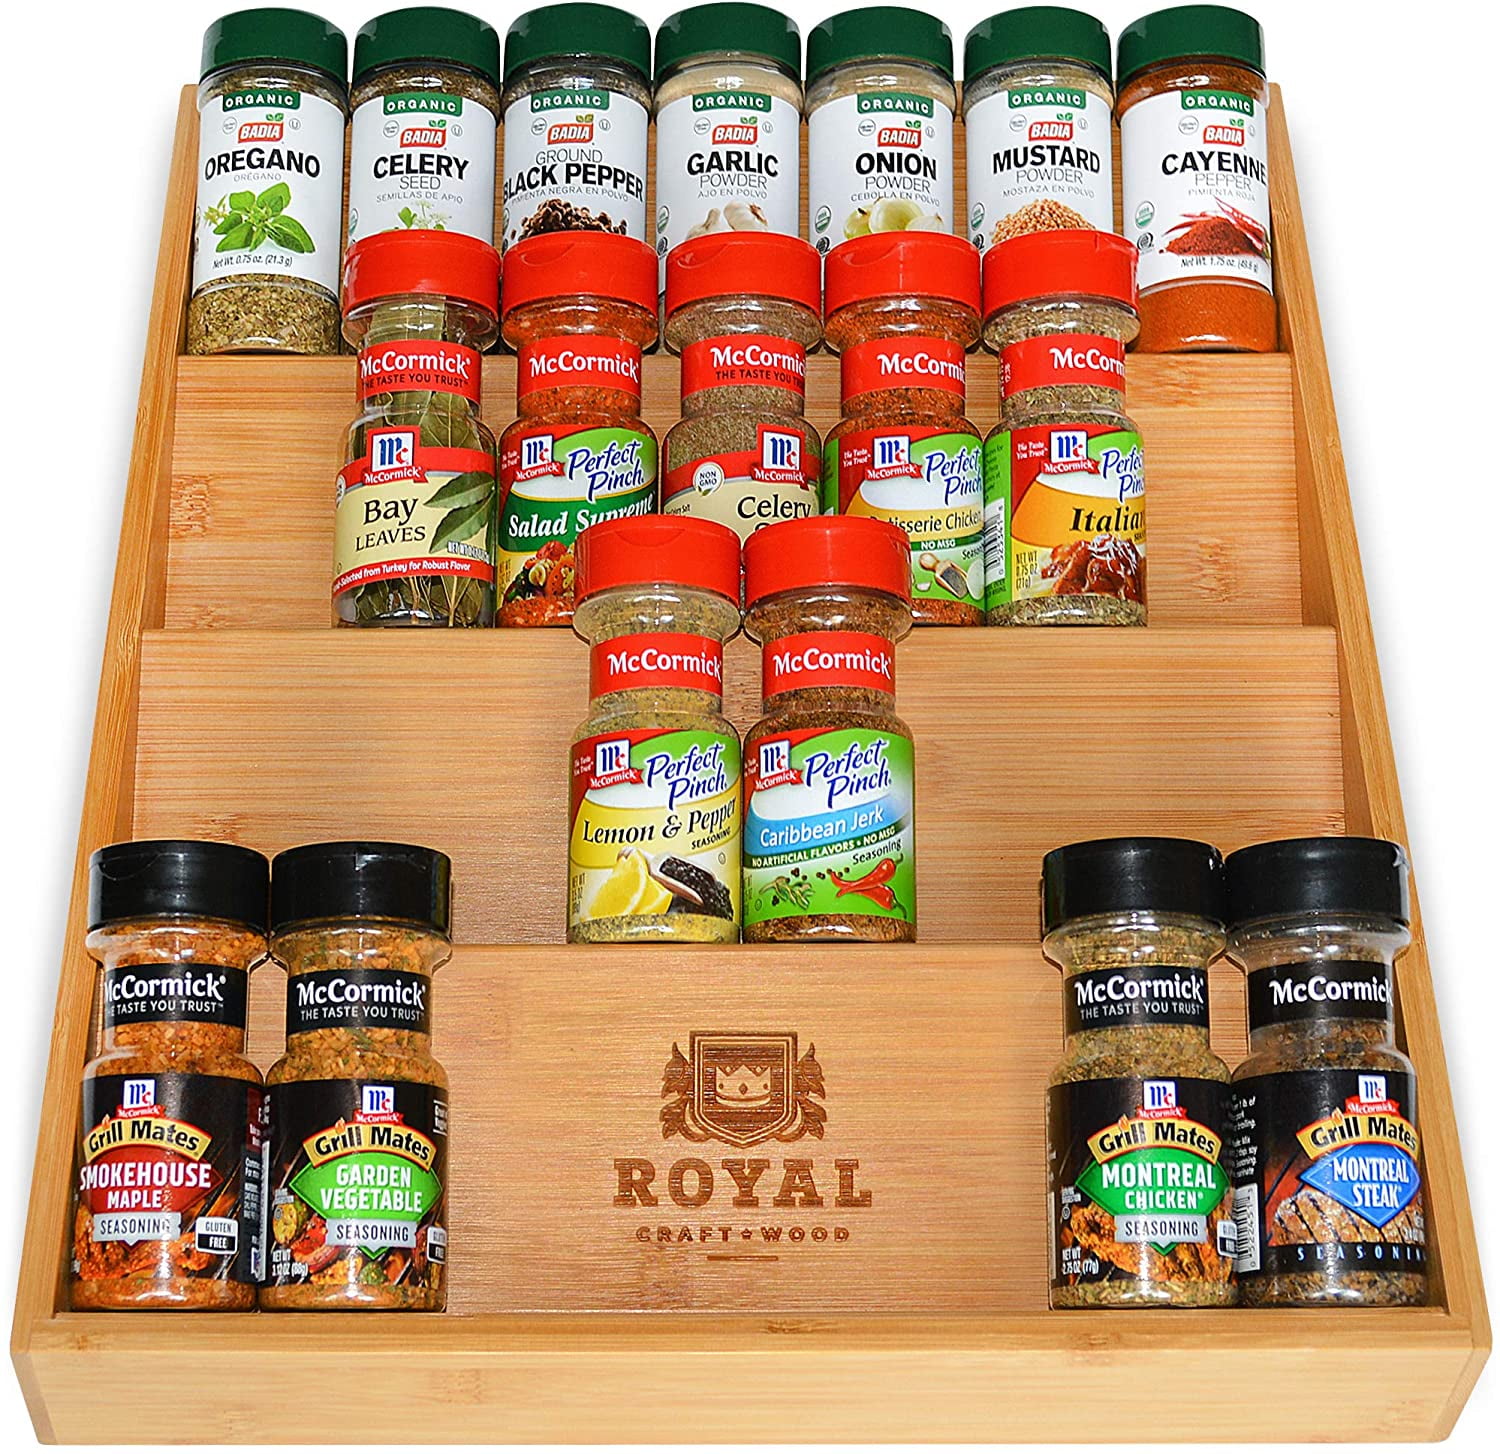 Wooden Spice Rack Organizer 4 Tier Cabinet Cupboard Pantry Shelf Luxury Bamboo Drawer Spices Herbs Kitchen Dividers Jars 13 5 X 17 2 7d90b42a 11af 4248 8451 2e3190e42b7a.b9e9d6a3f1df47b5a705197e450322b5 